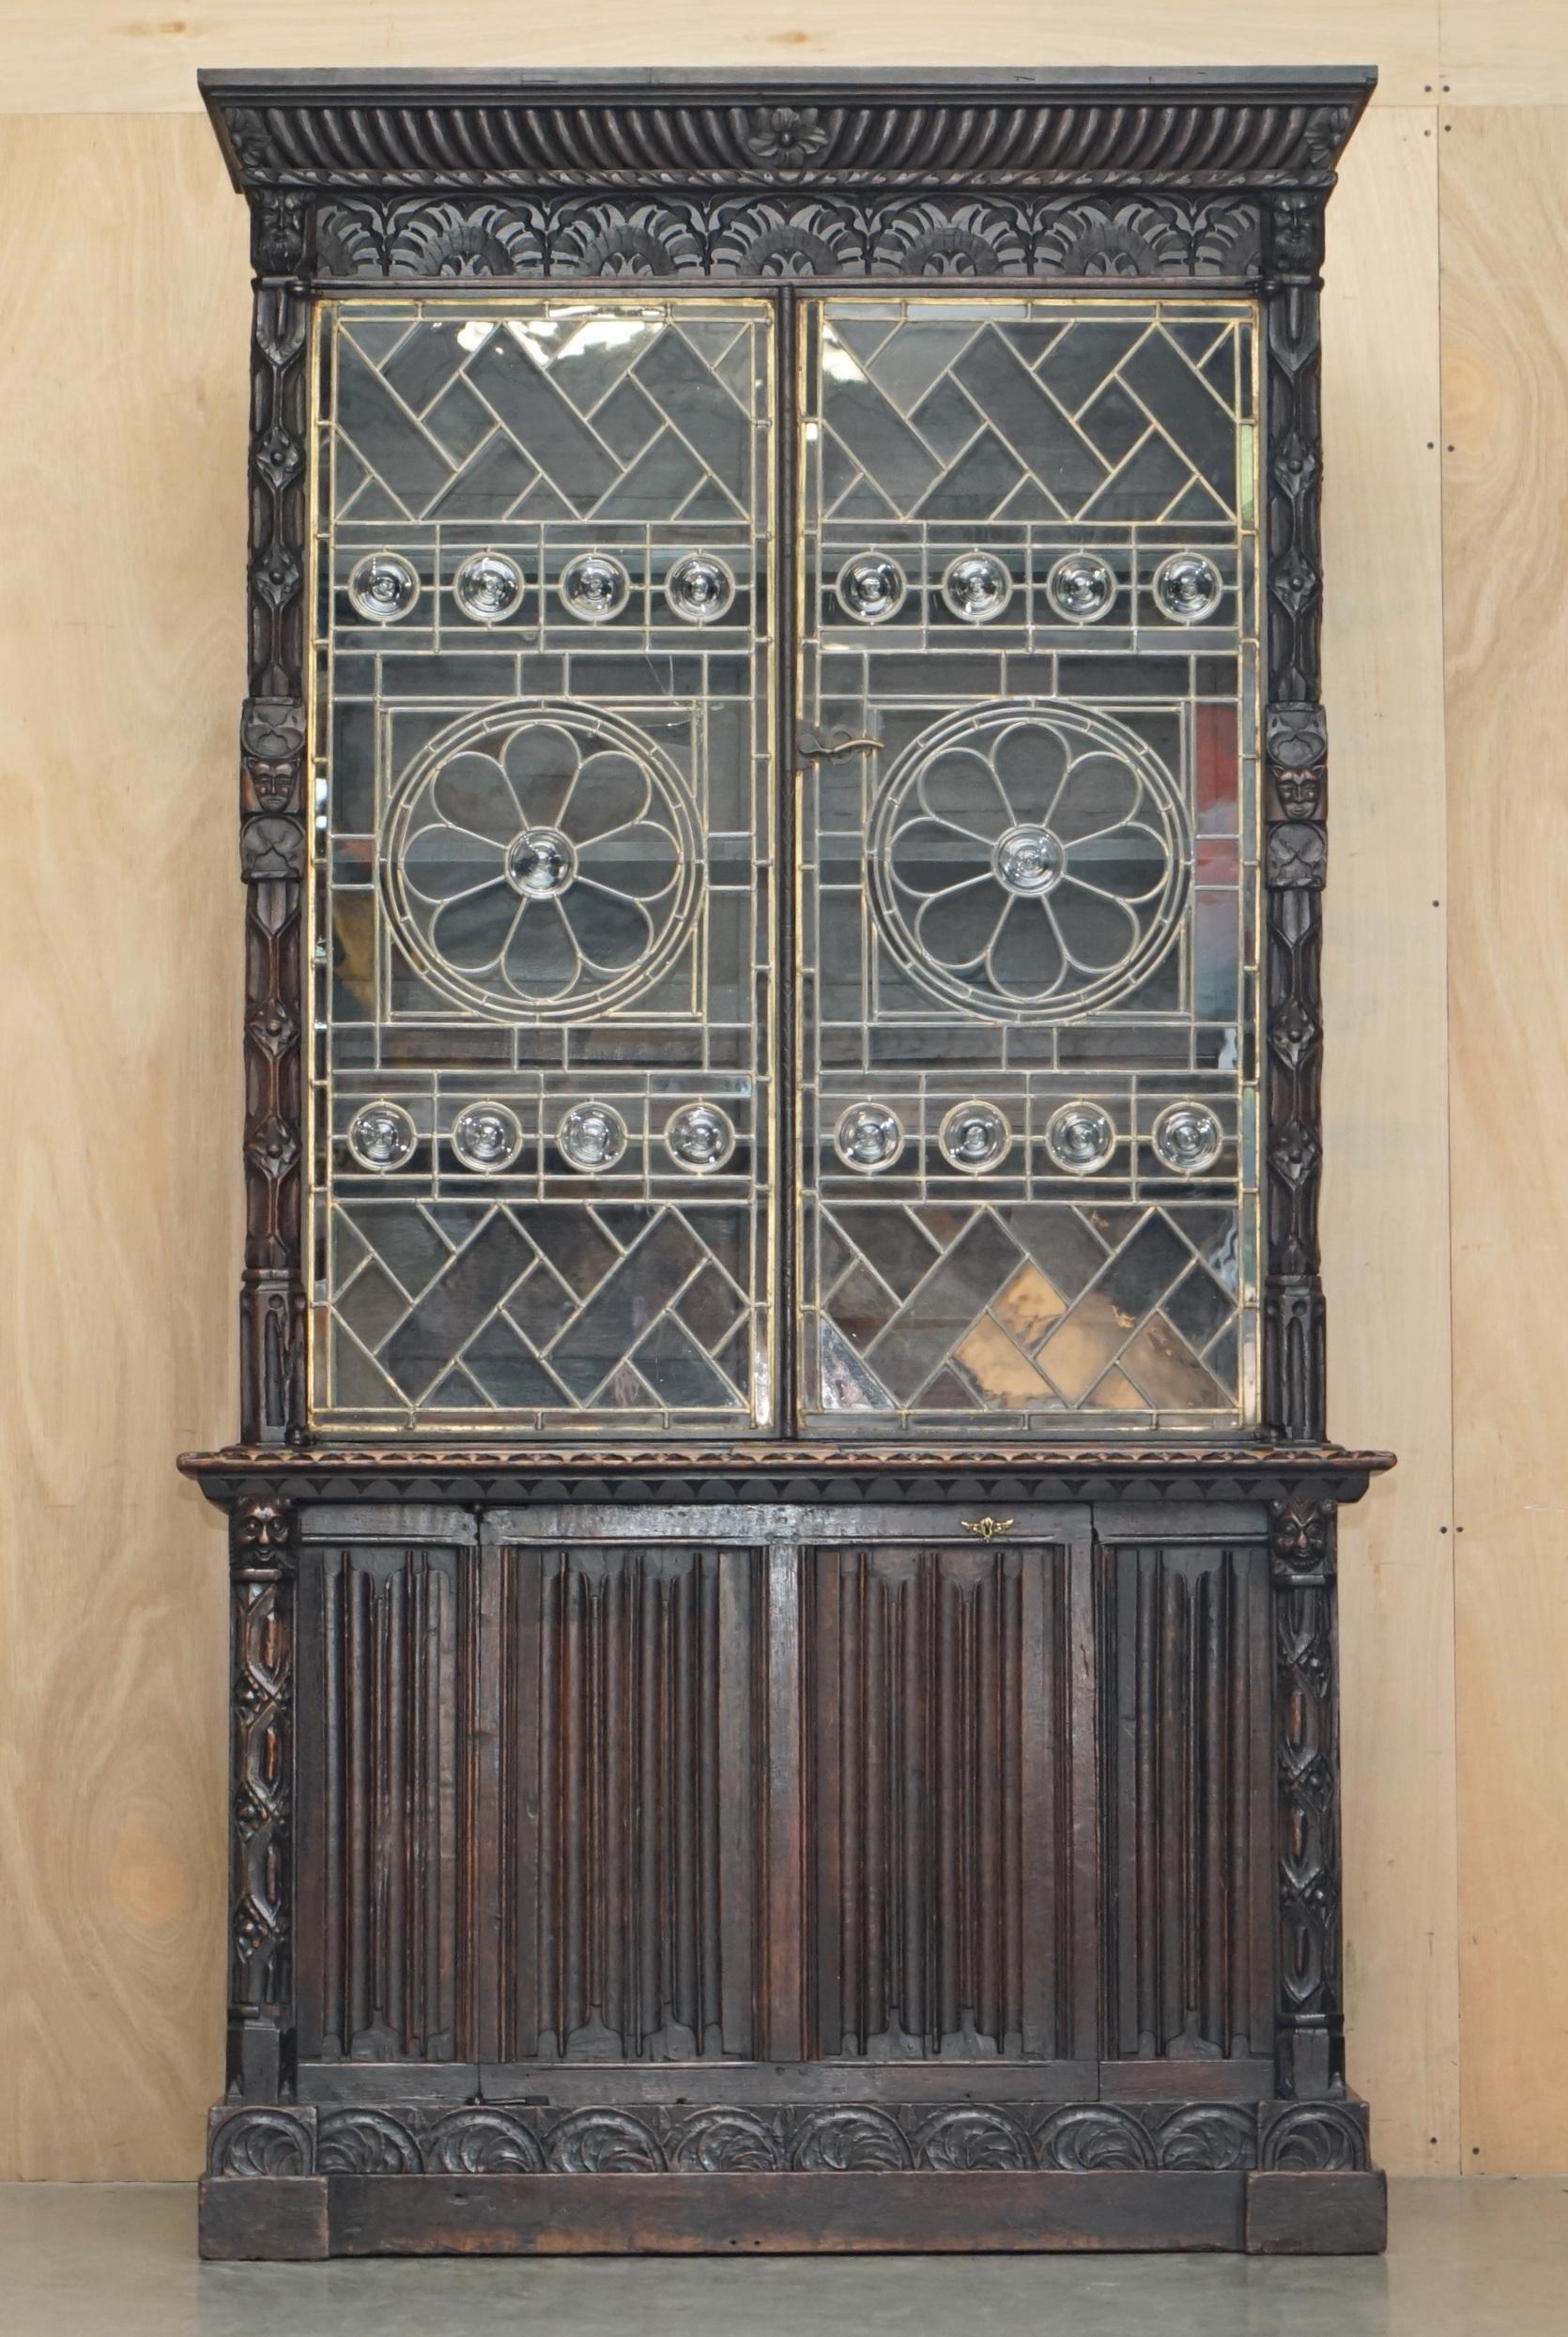 Royal House Antiques

Royal House Antiques is delighted to offer for sale this absolutely exquisite 18th century library bookcase with 15th century Jacobean Linen fold carved paneling and the most amazing Astral glazed doors

Please note the